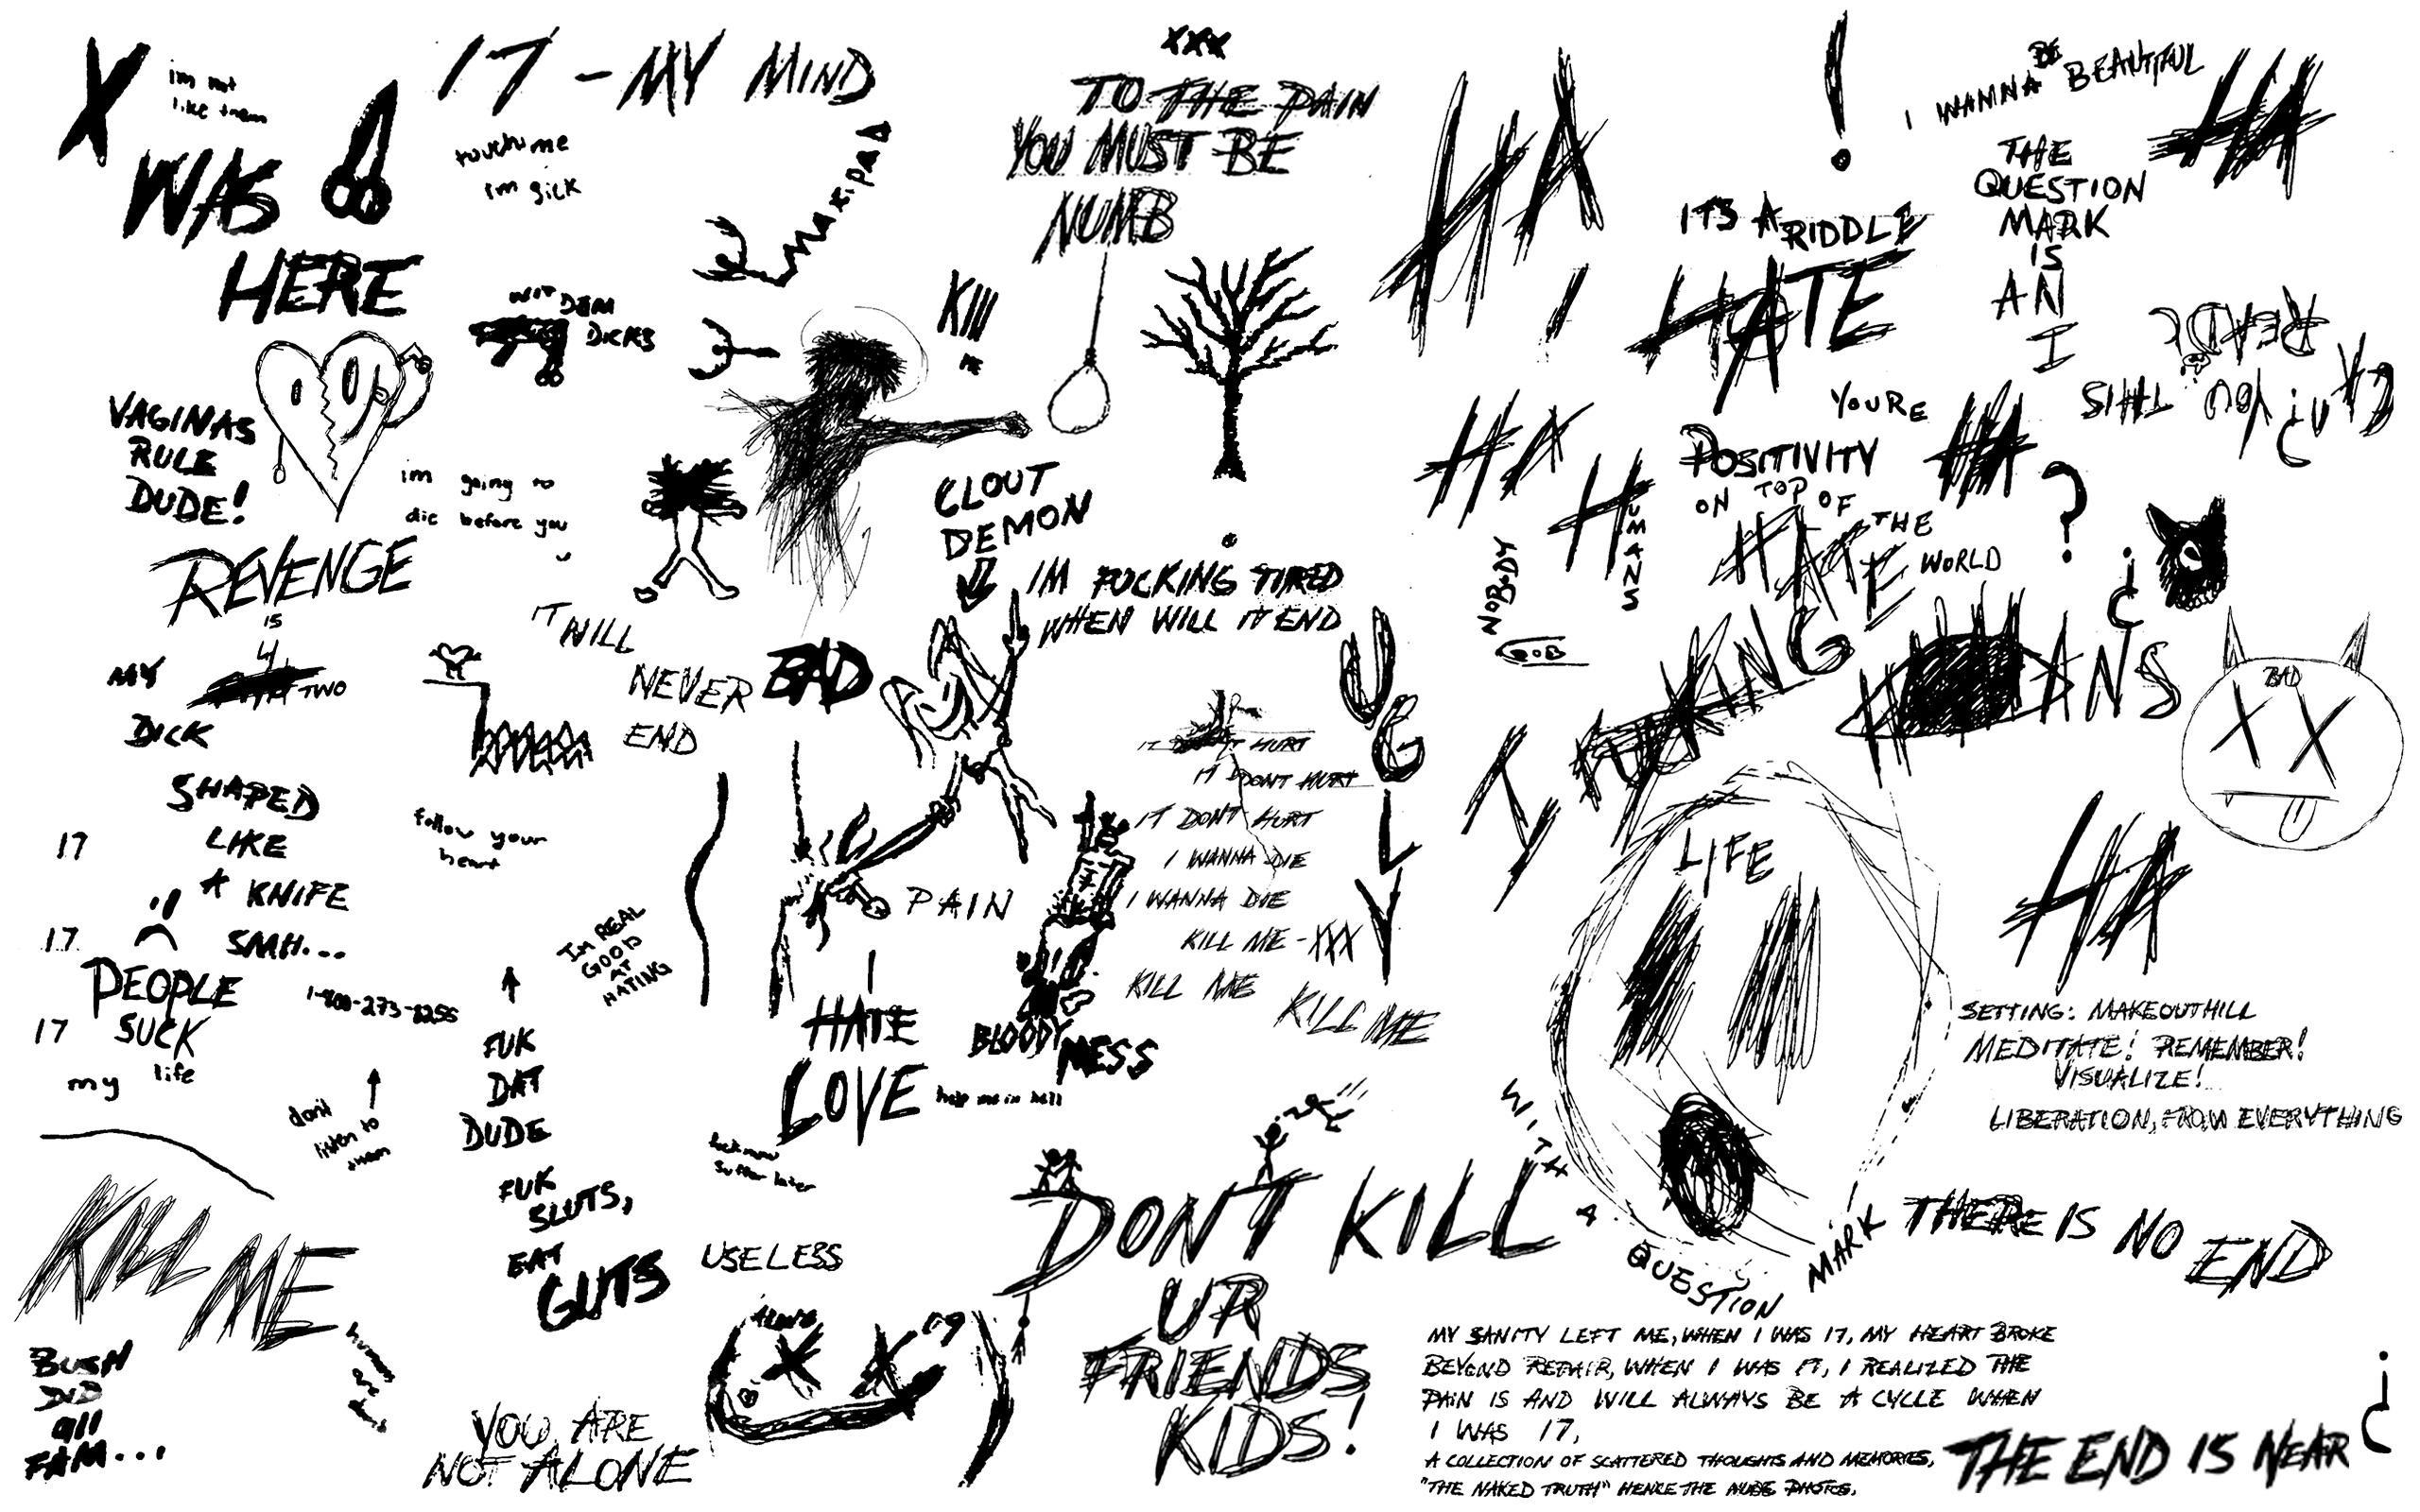 Made this XXXTentacion wallpaper out if his drawings! Don't know